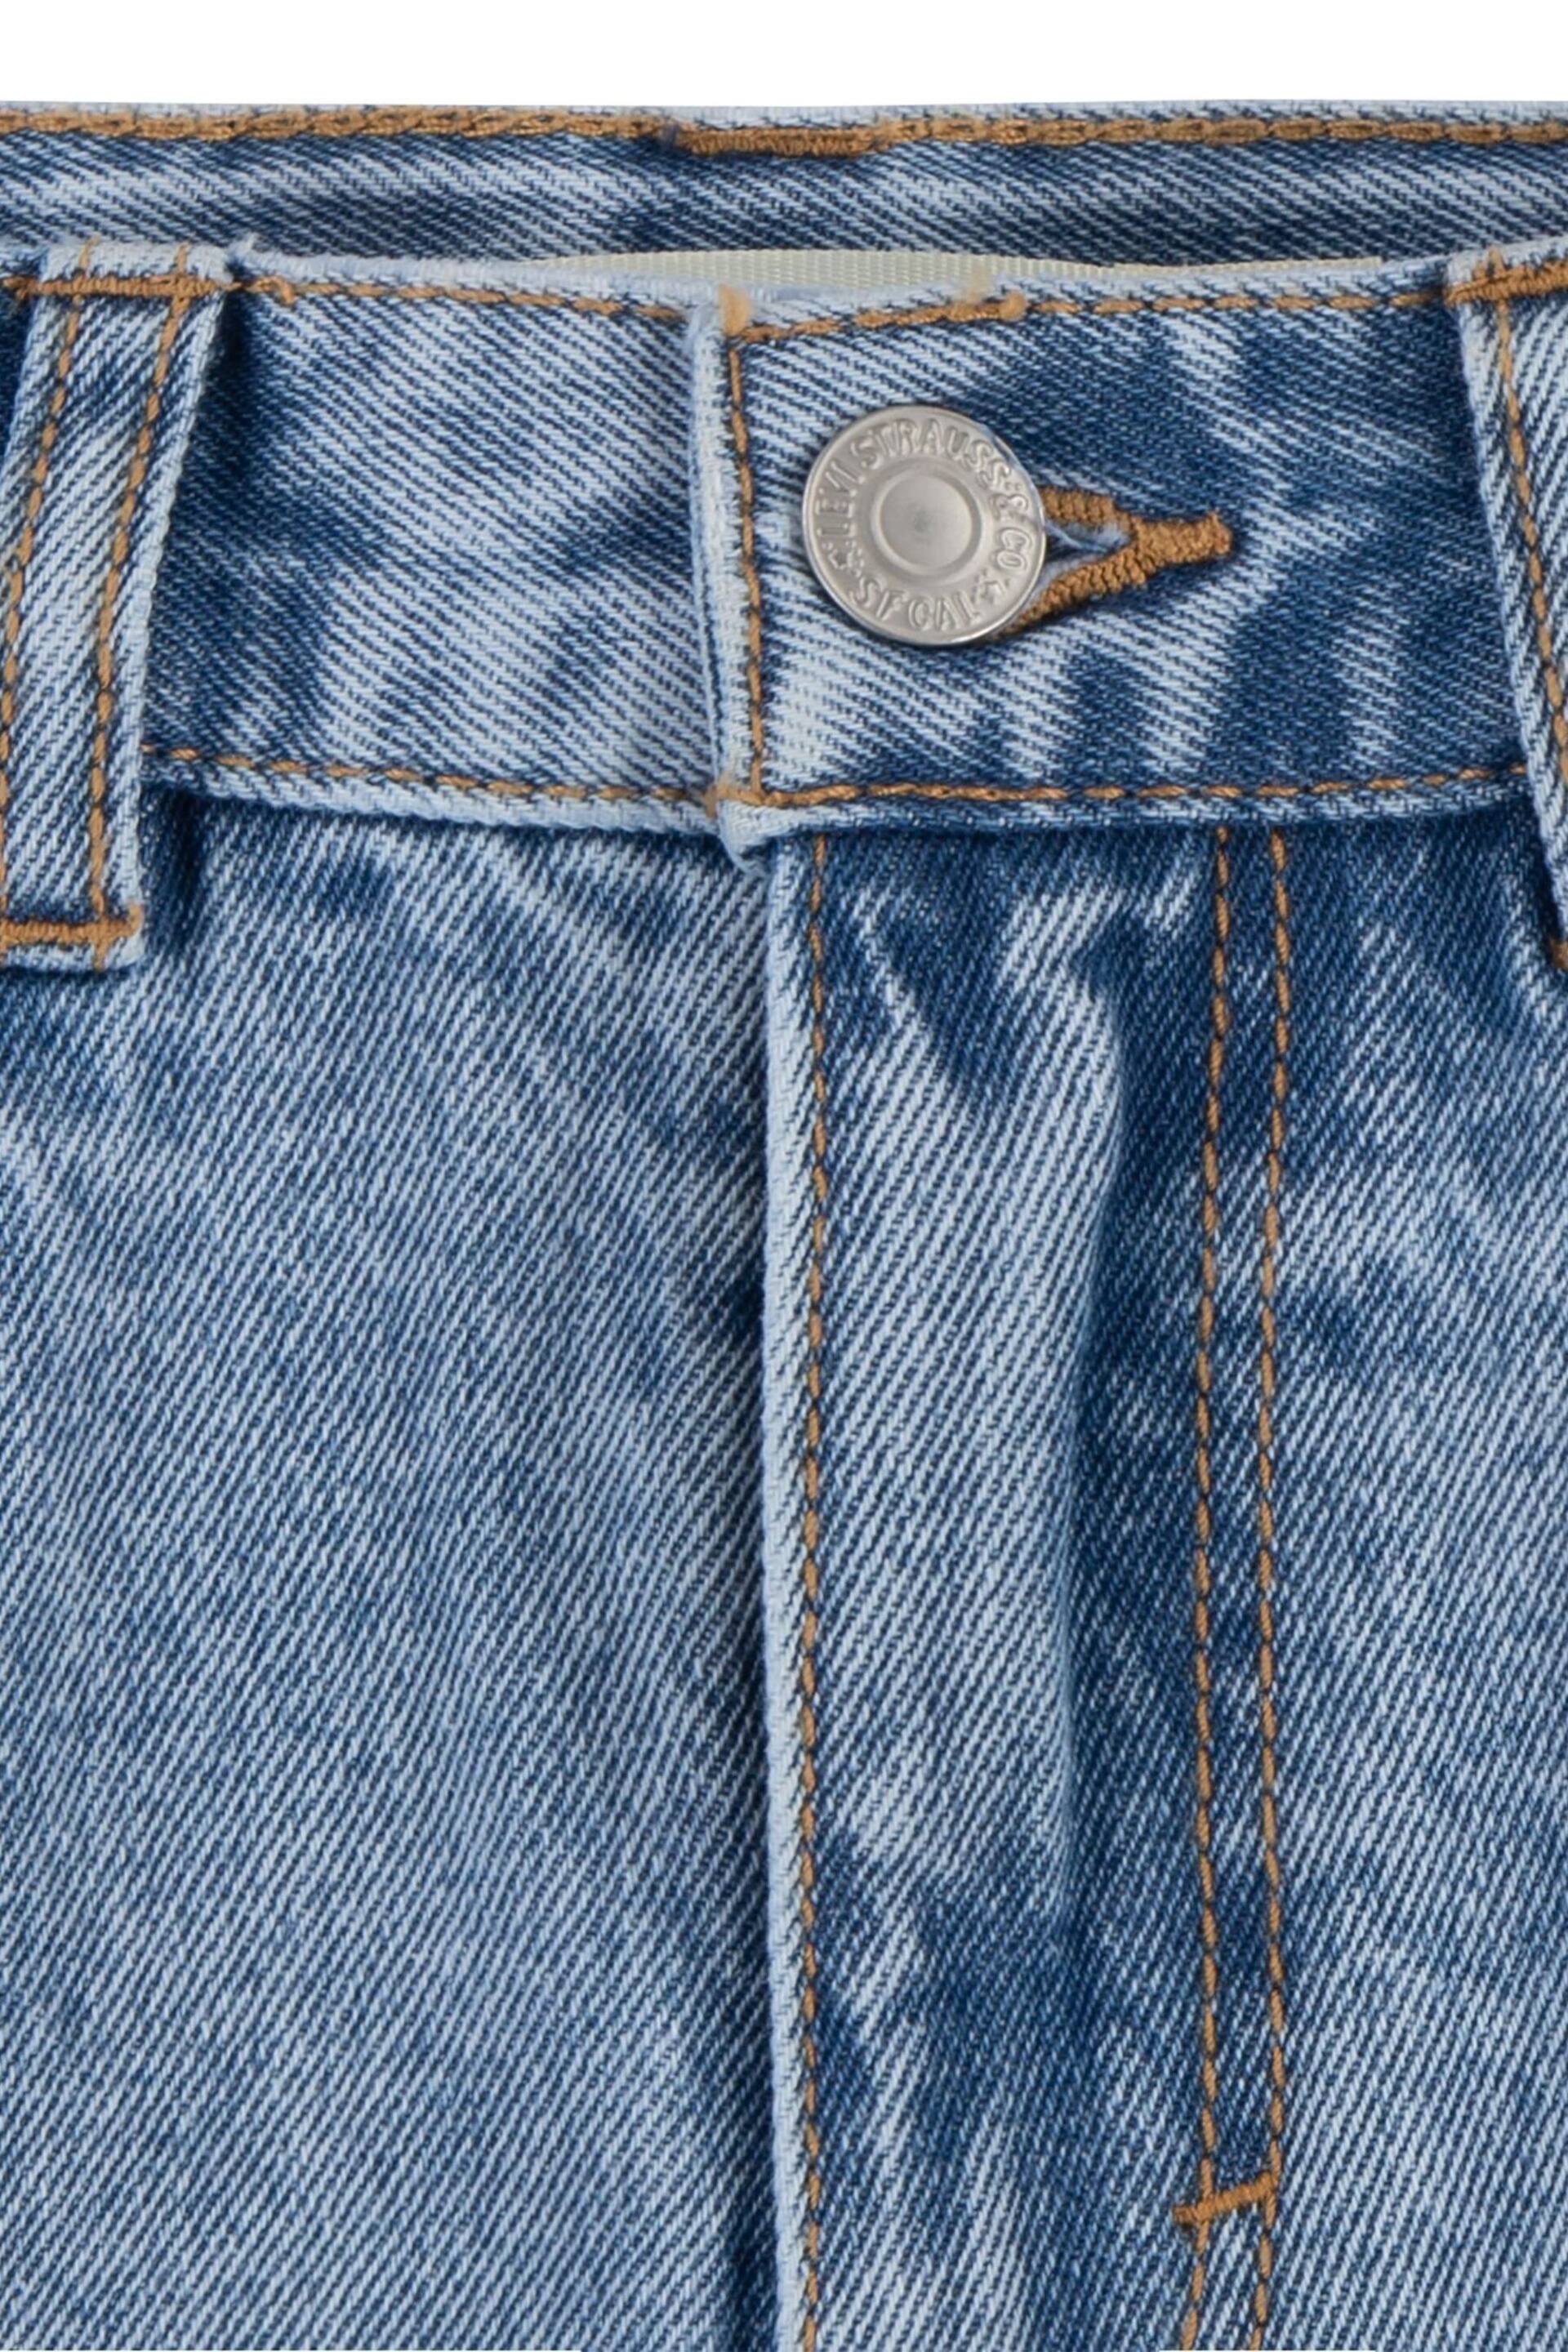 Levi's® Blue Light Mom Denim Shorts With Roll Cuff - Image 6 of 8